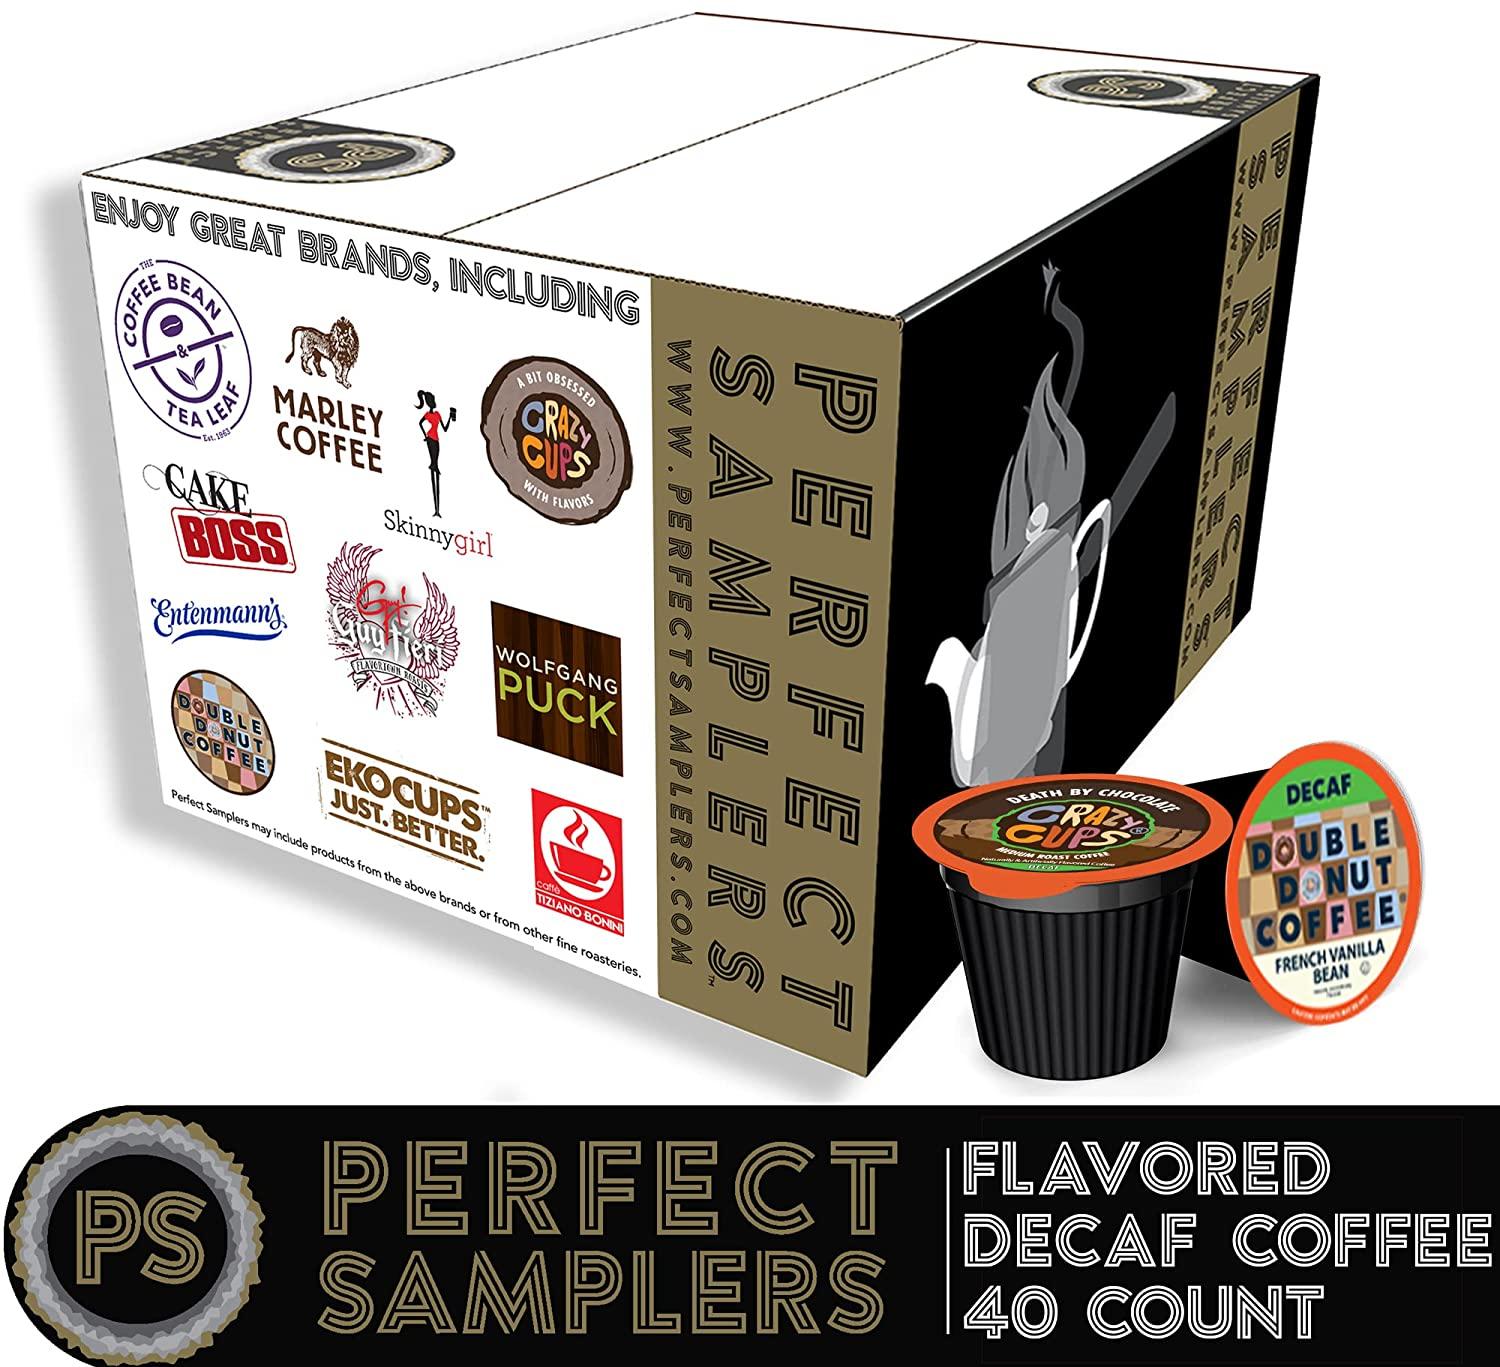  Crazy Cups Christmas Variety Pack of Single Serve Flavored  Coffee Pods For Keurig, 30 Count Holiday Gift : Grocery & Gourmet Food